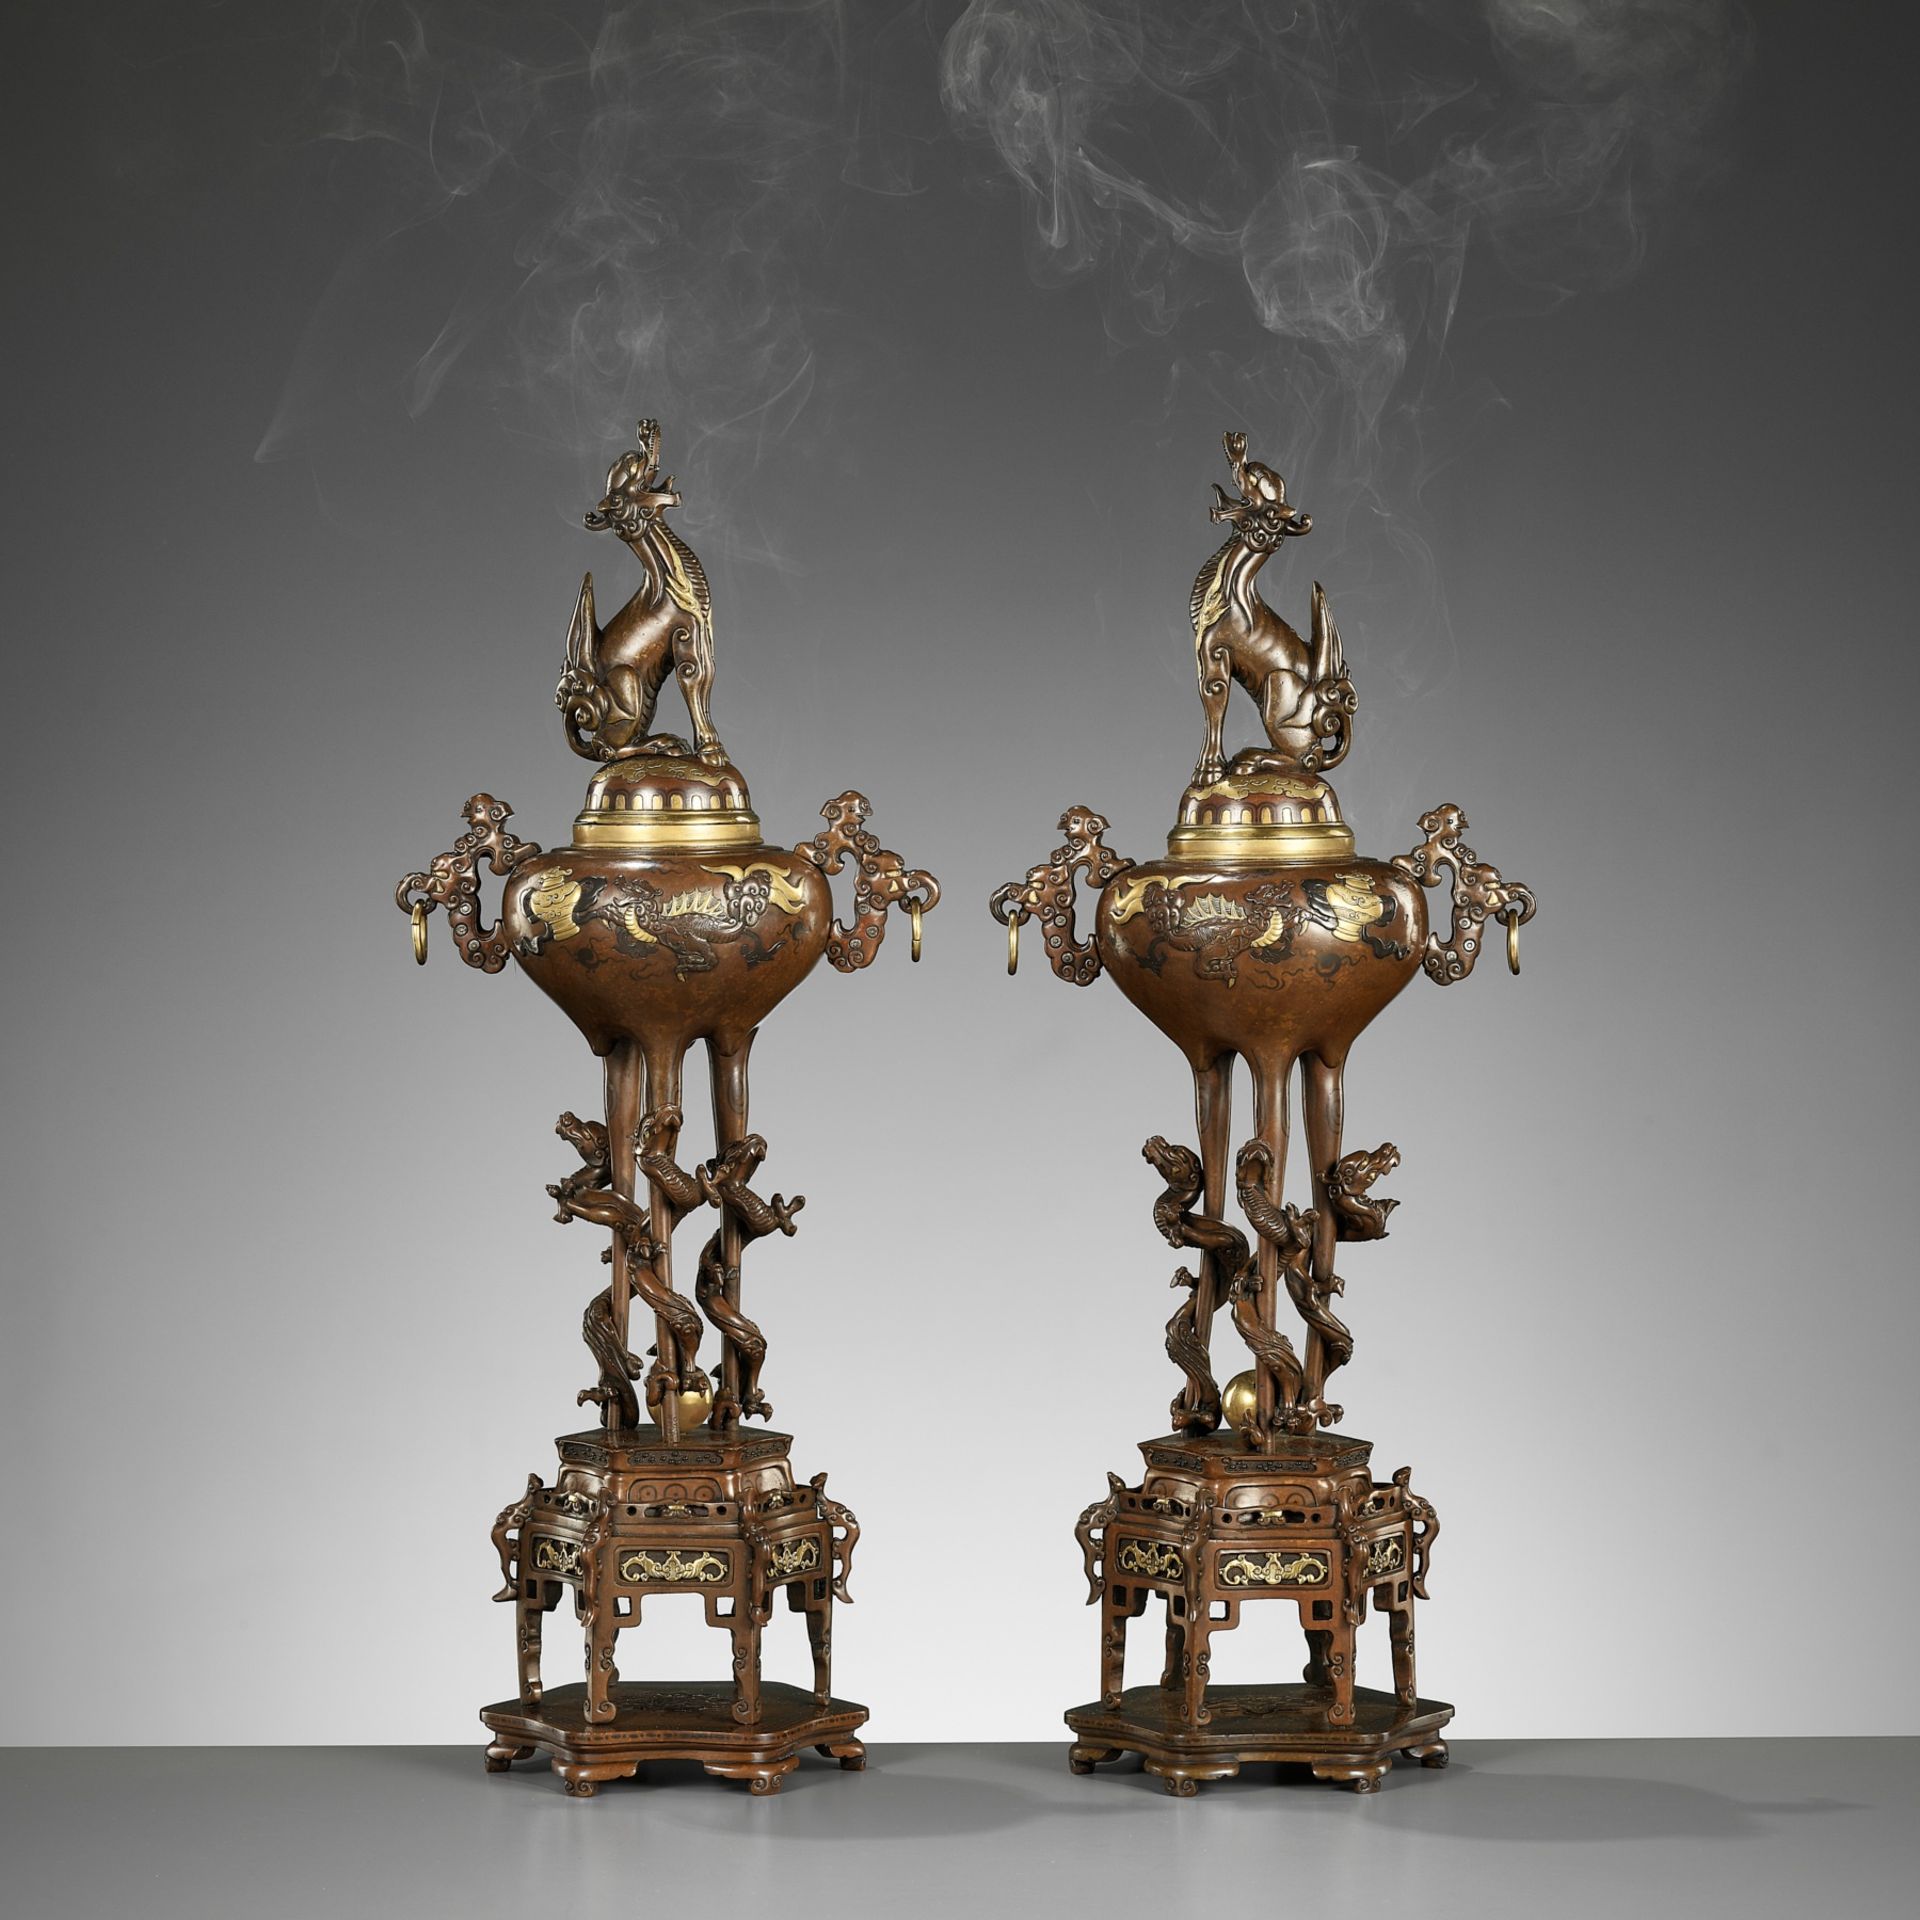 A PAIR OF SUPERB GOLD-INLAID BRONZE 'MYTHICAL BEASTS' KORO (INCENSE BURNERS) AND COVERS